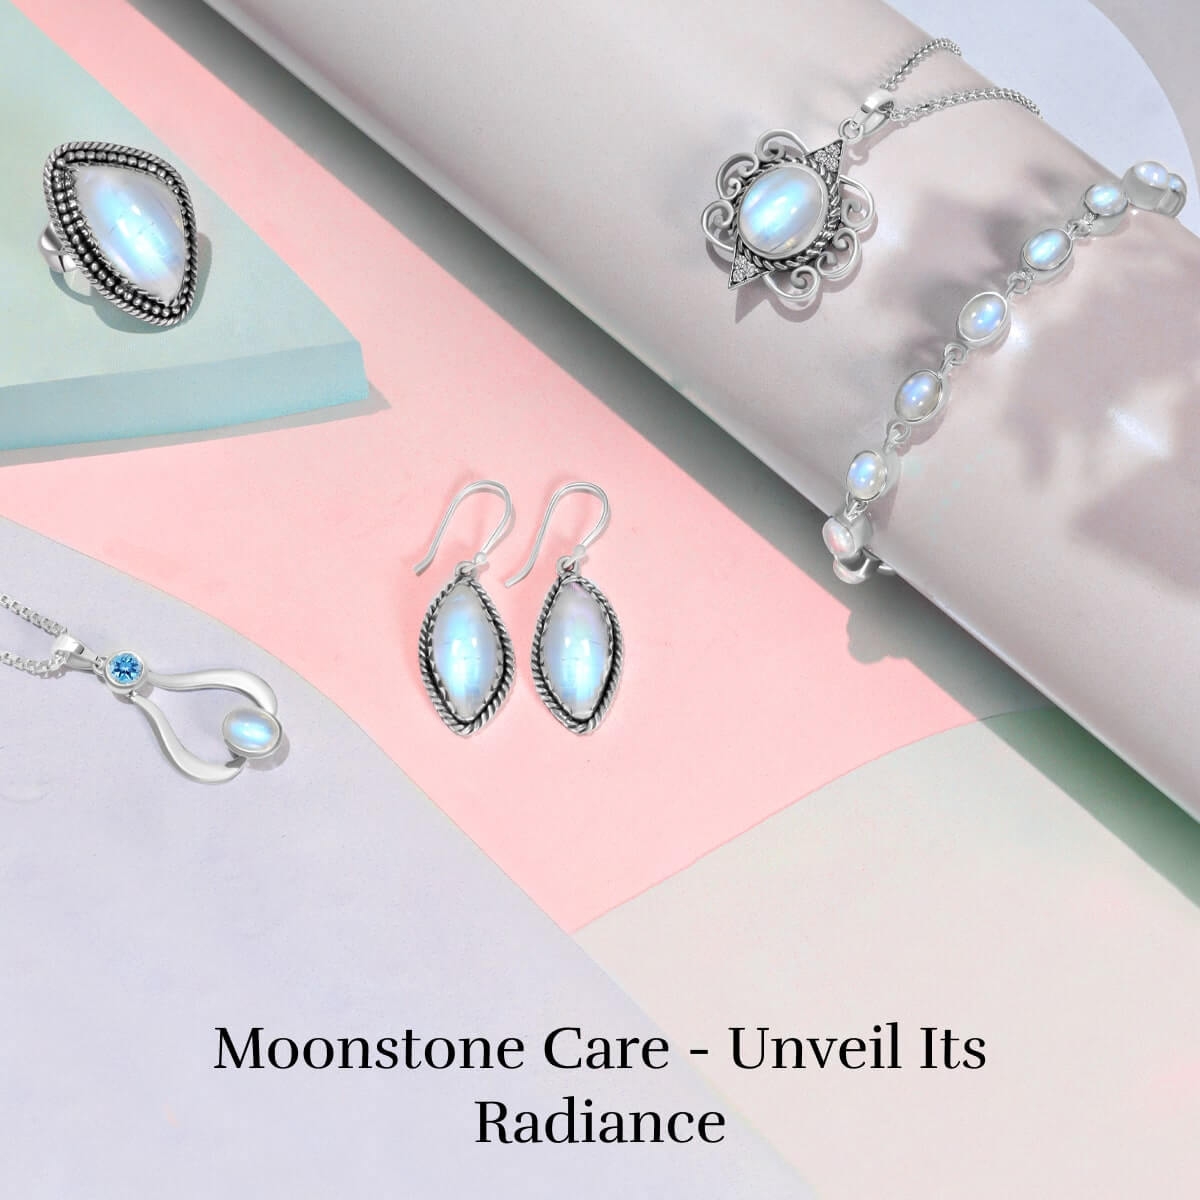 Moonstone needs care and cleaning